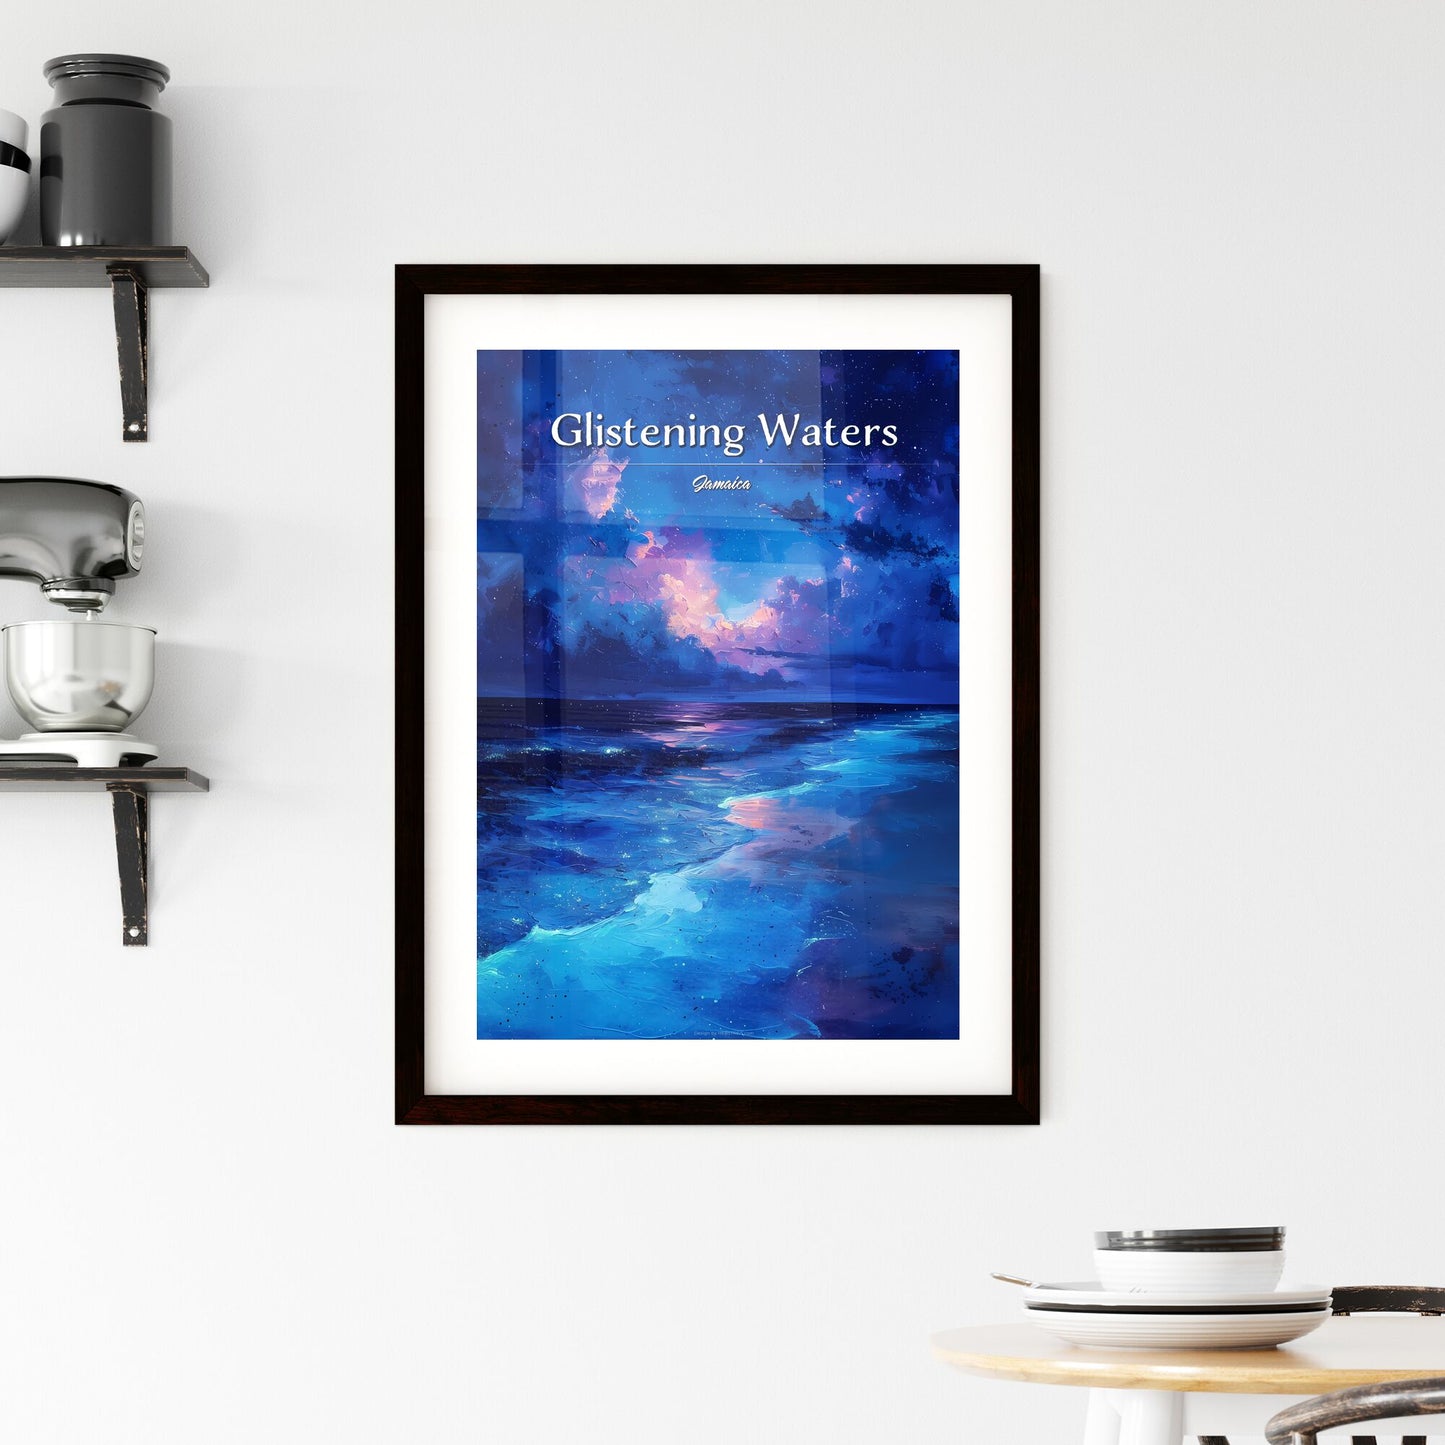 Glistening Waters Luminous Lagoon, Jamaica - Art print of a blue and purple sky over a body of water Default Title